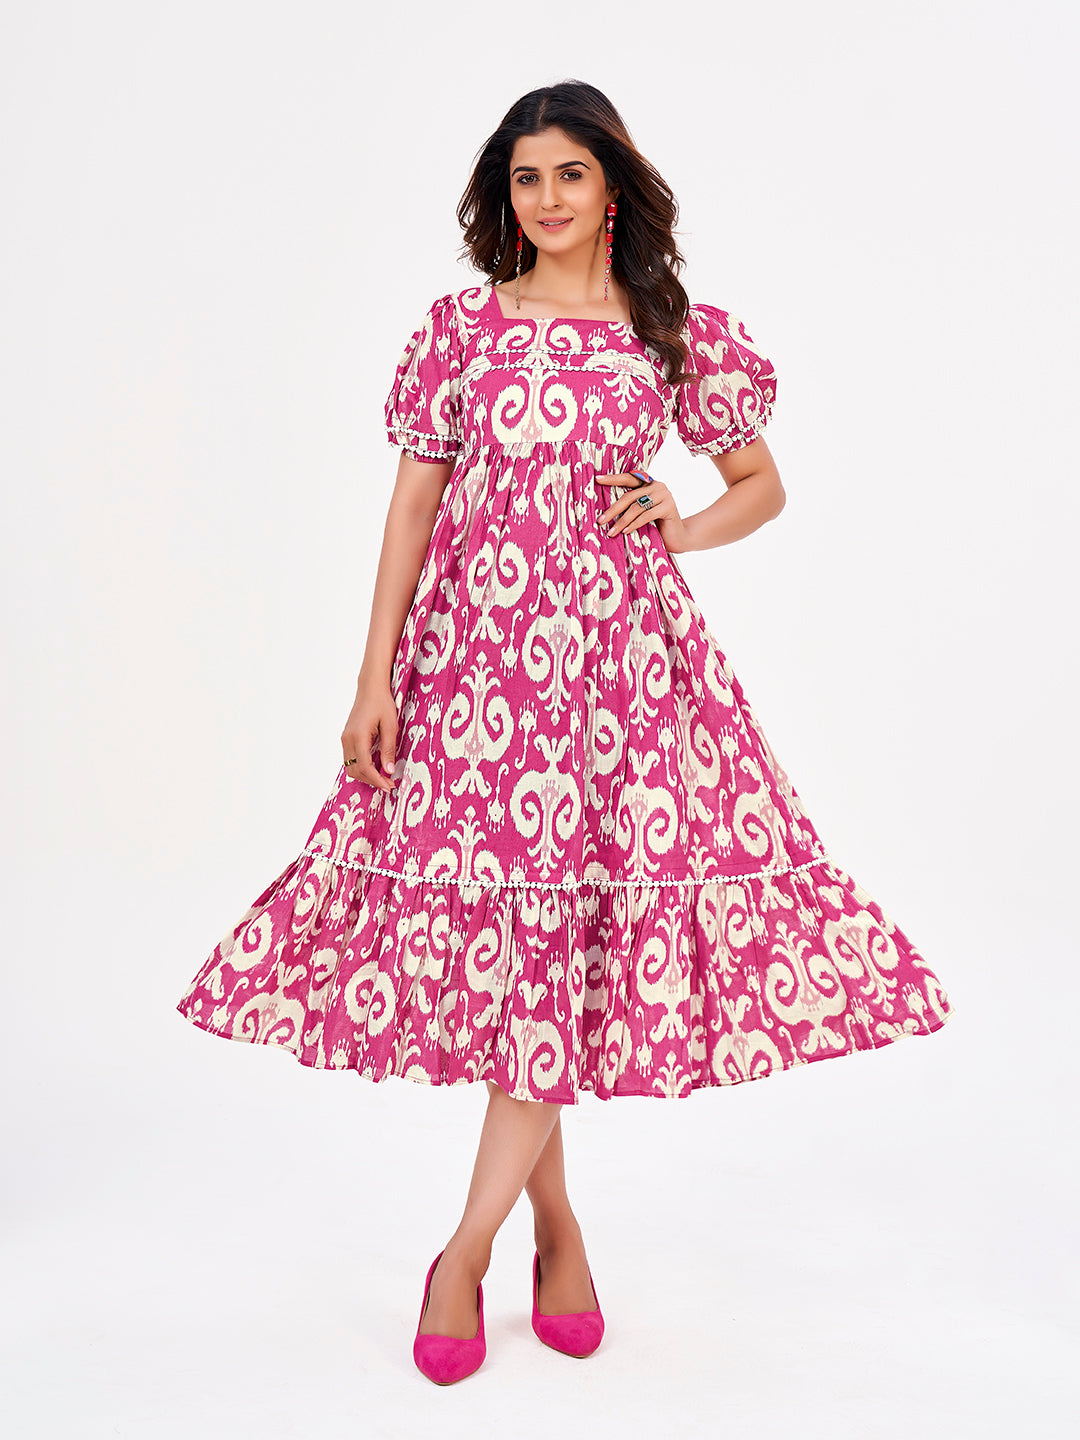 Deep Pink Maxi Dress: Ikkat Print, Square Neckline, Short Puff Sleeves with Lace